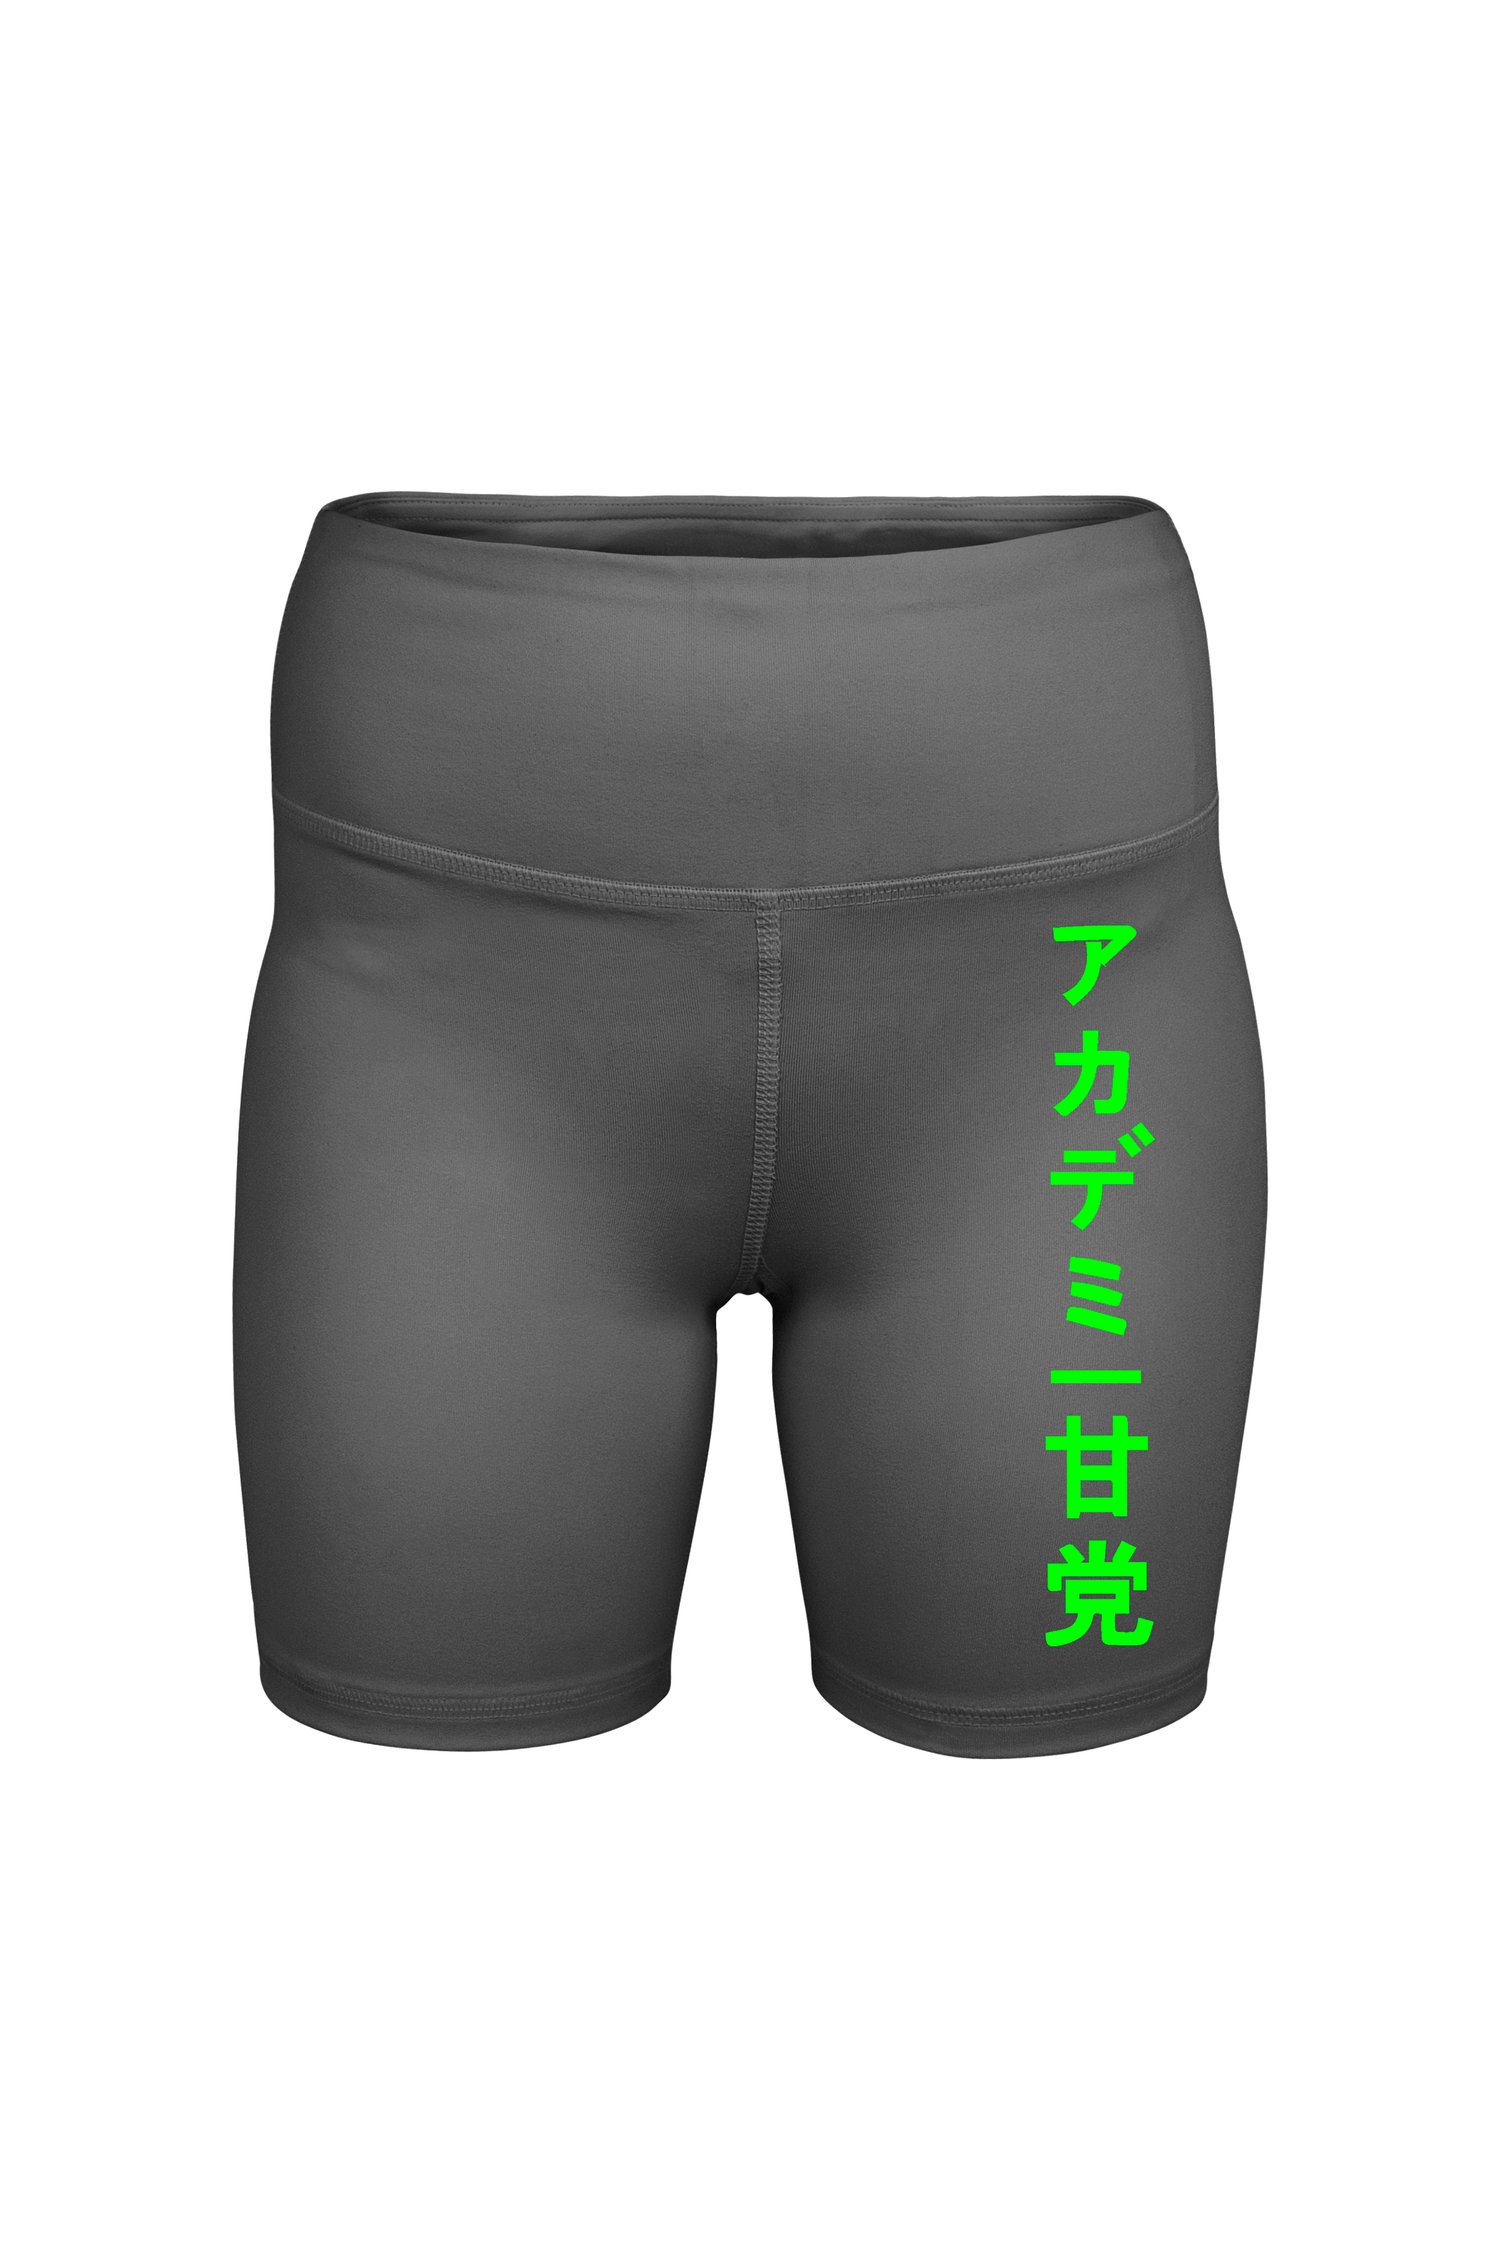 Image of Sporty Shorties Biker Shorts Grey & Lime Green